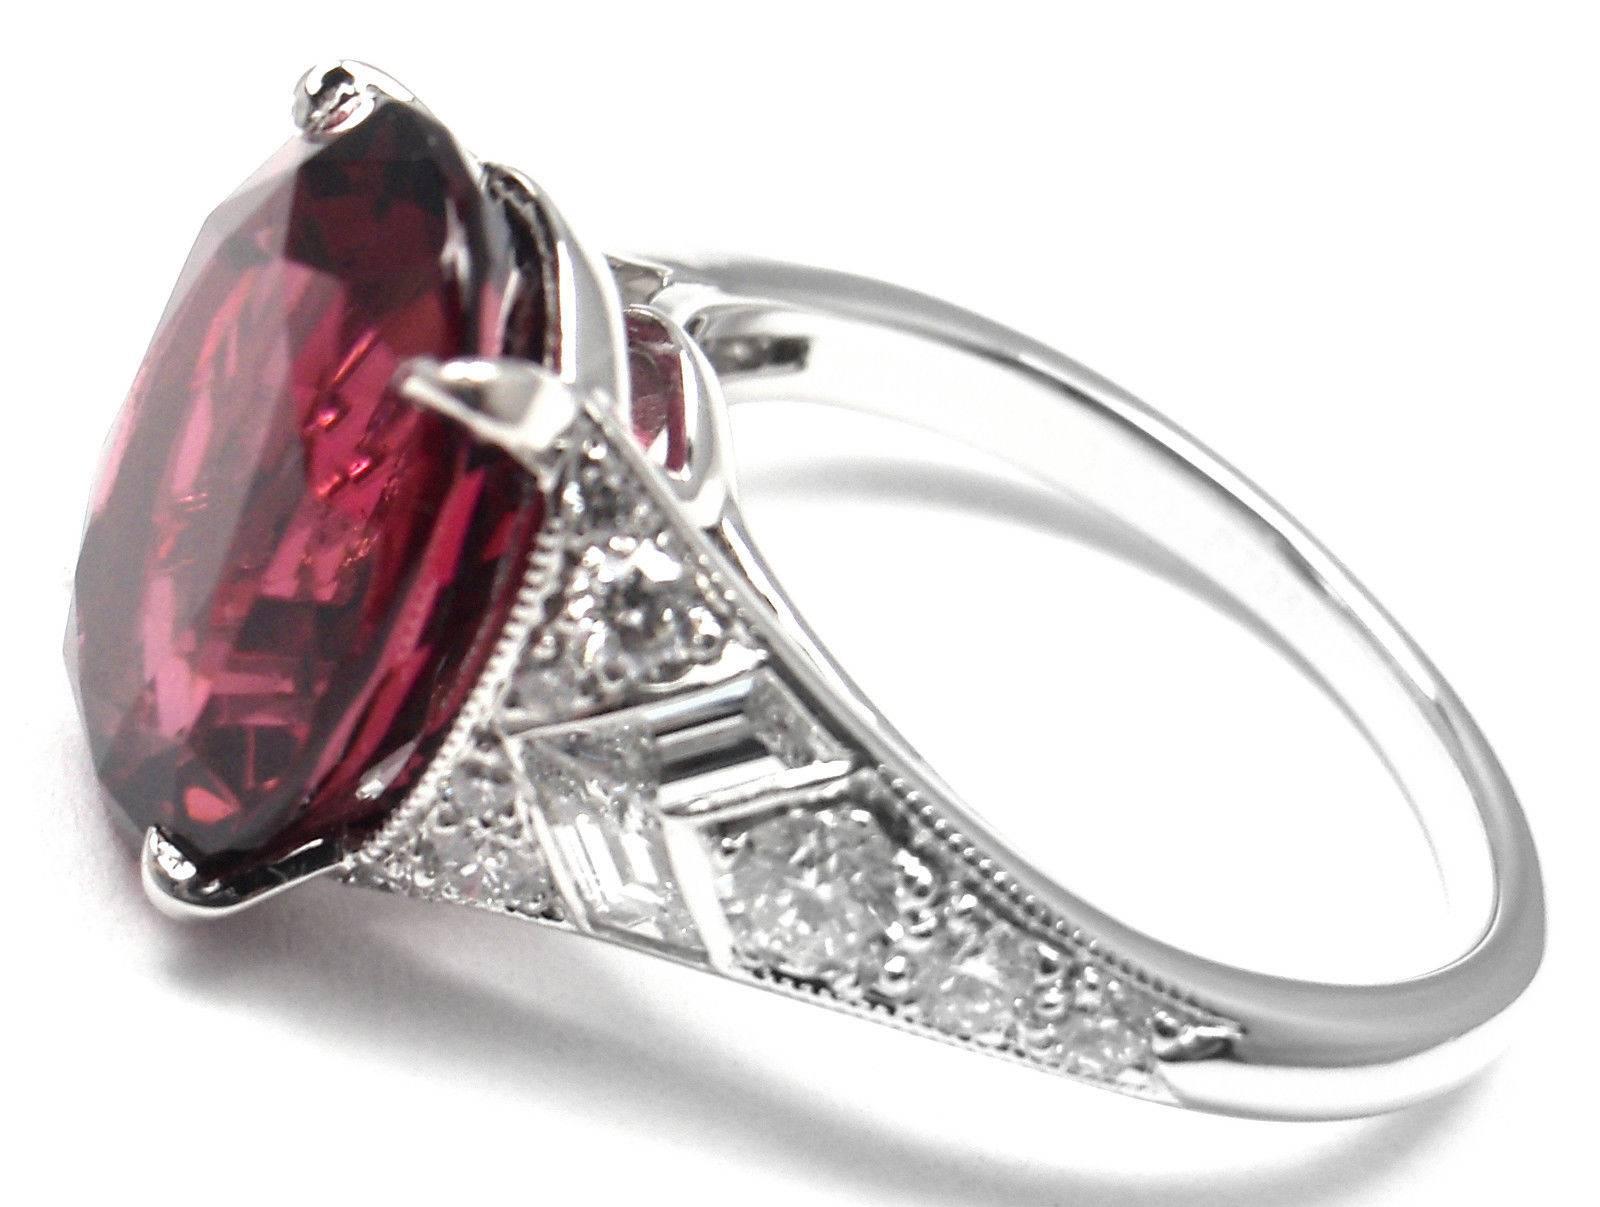 Platinum 6.07ct Rubellite & Diamond Ring by Tiffany & Co.
With 1 large oval rubellite 6.07ct
18 round brilliant cut diamonds VS1 clarity, G color and 4 baguette diamonds VS1 clarity, G color total weight approx. 1ct

This ring comes with Tiffany